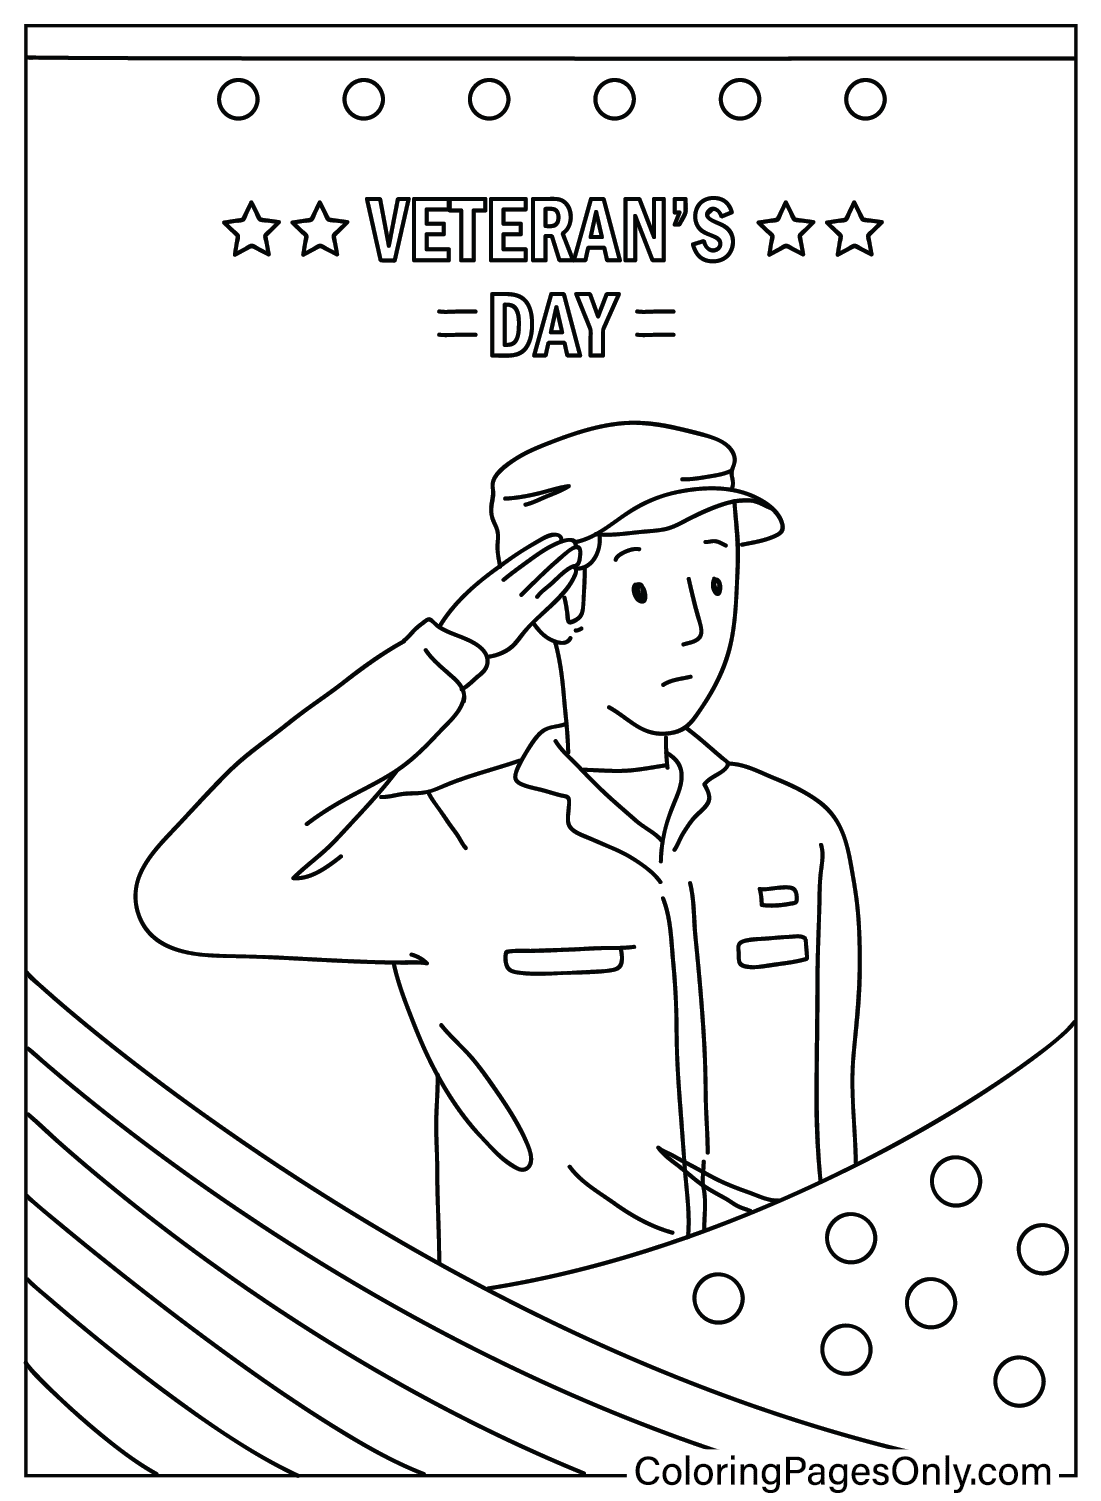 Veterans Day Coloring Page to Print